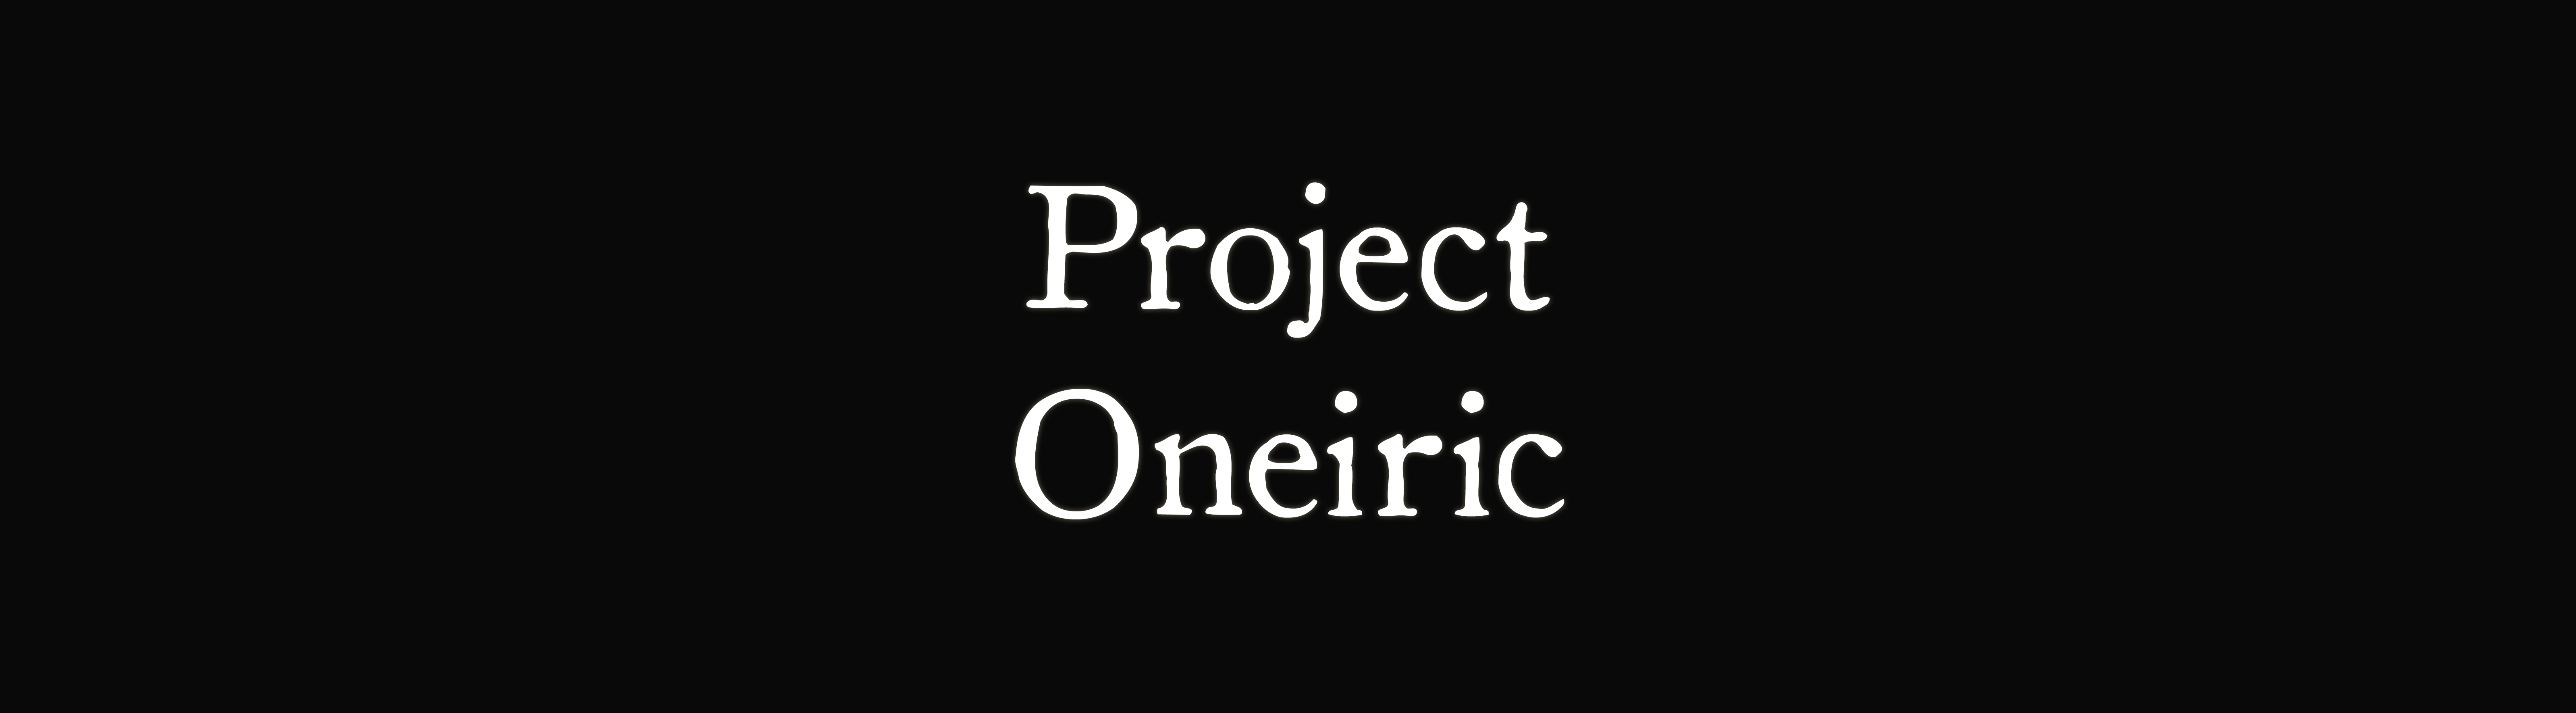 Project Oneiric